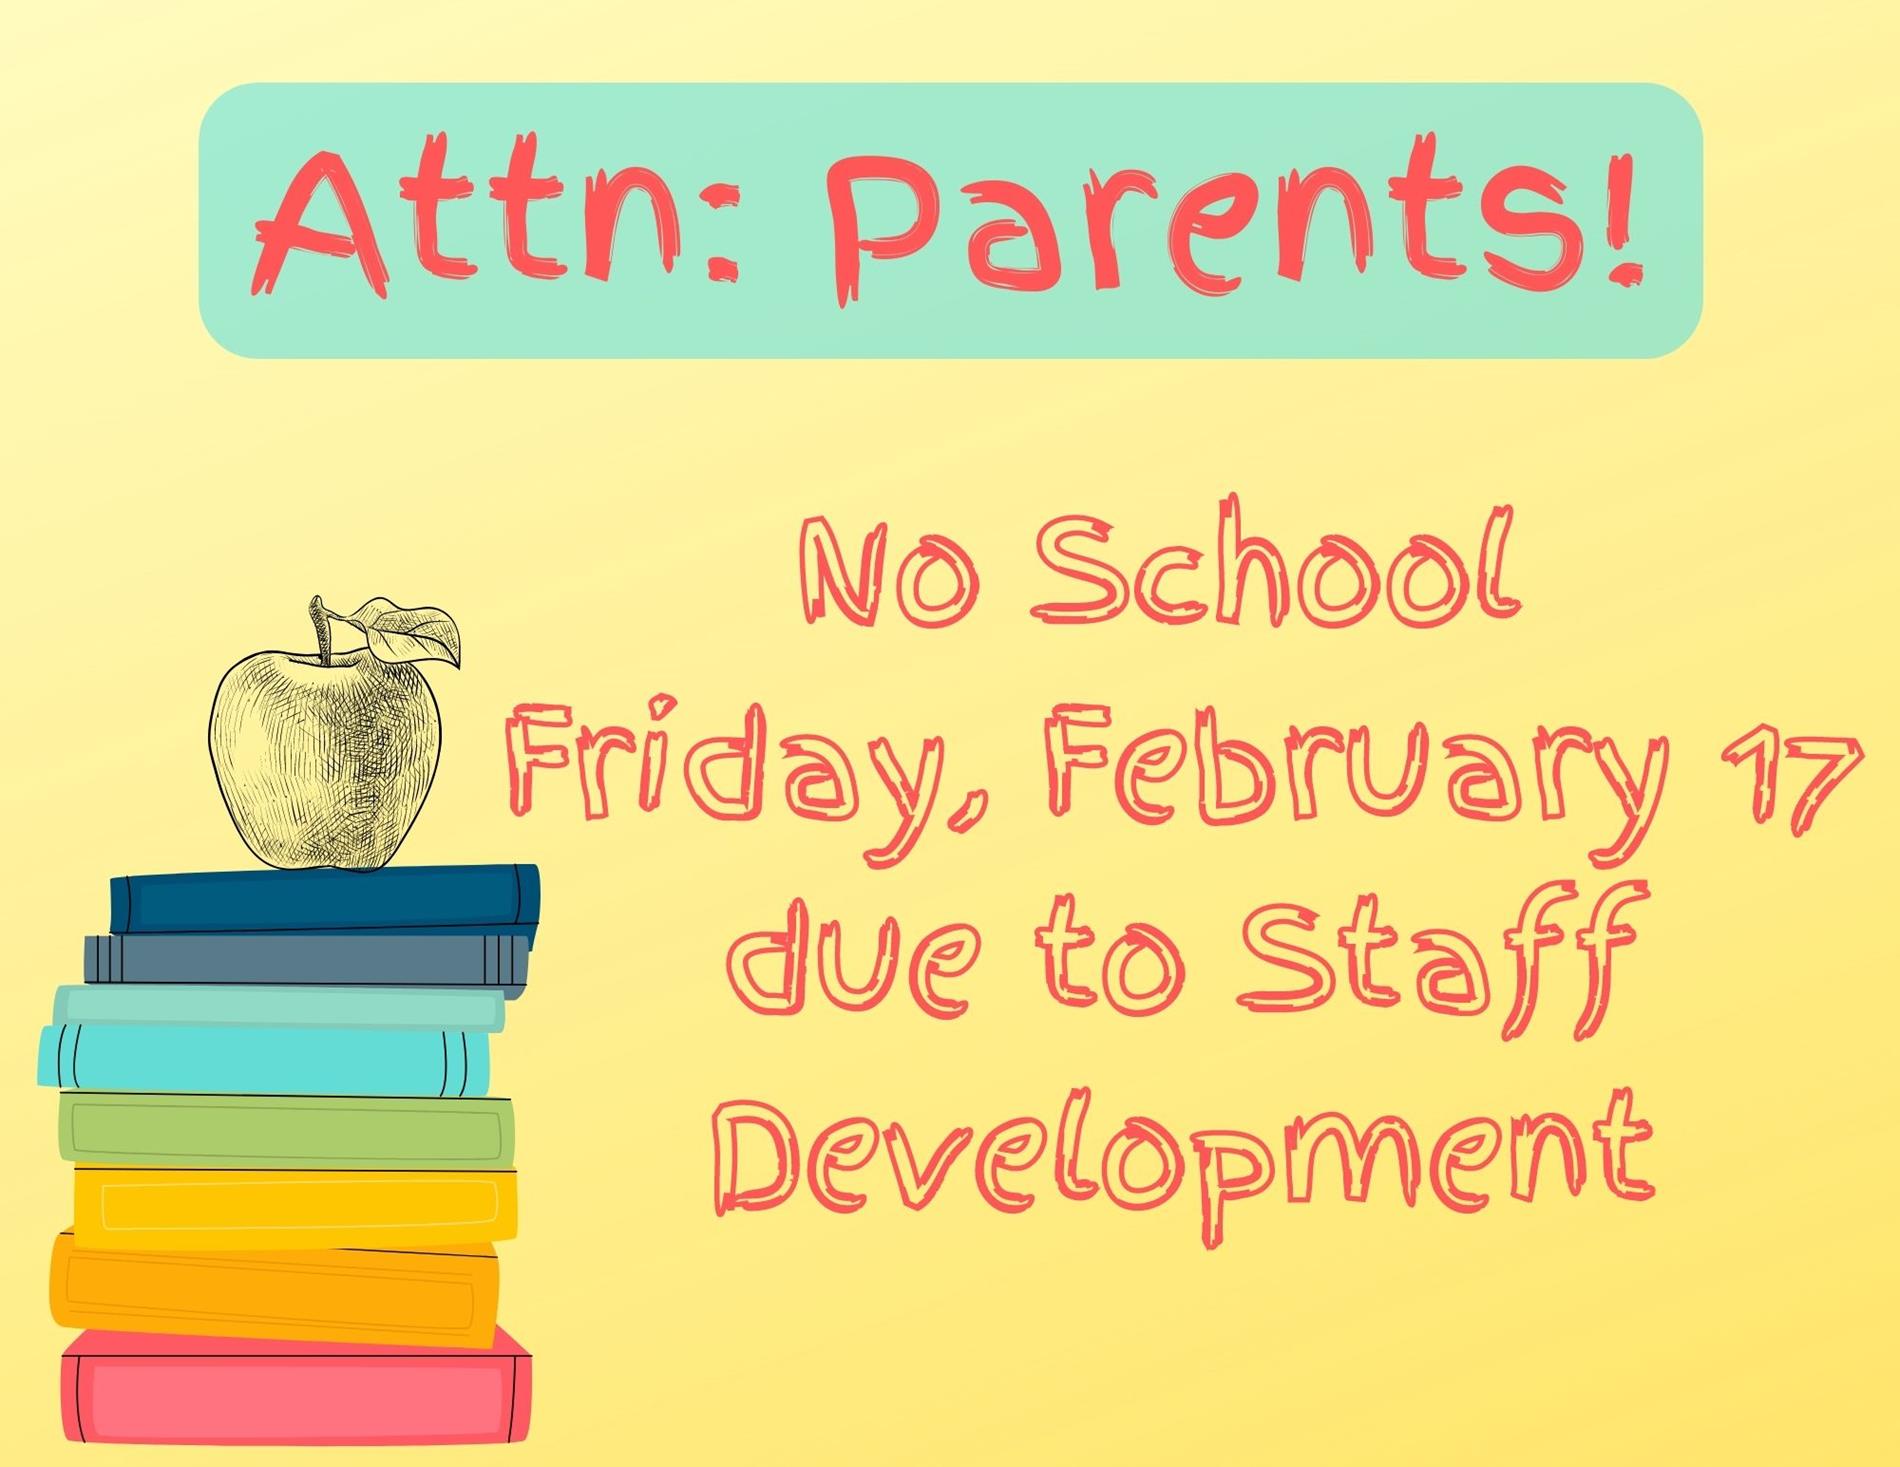 No School for students February 17 due to Staff Development